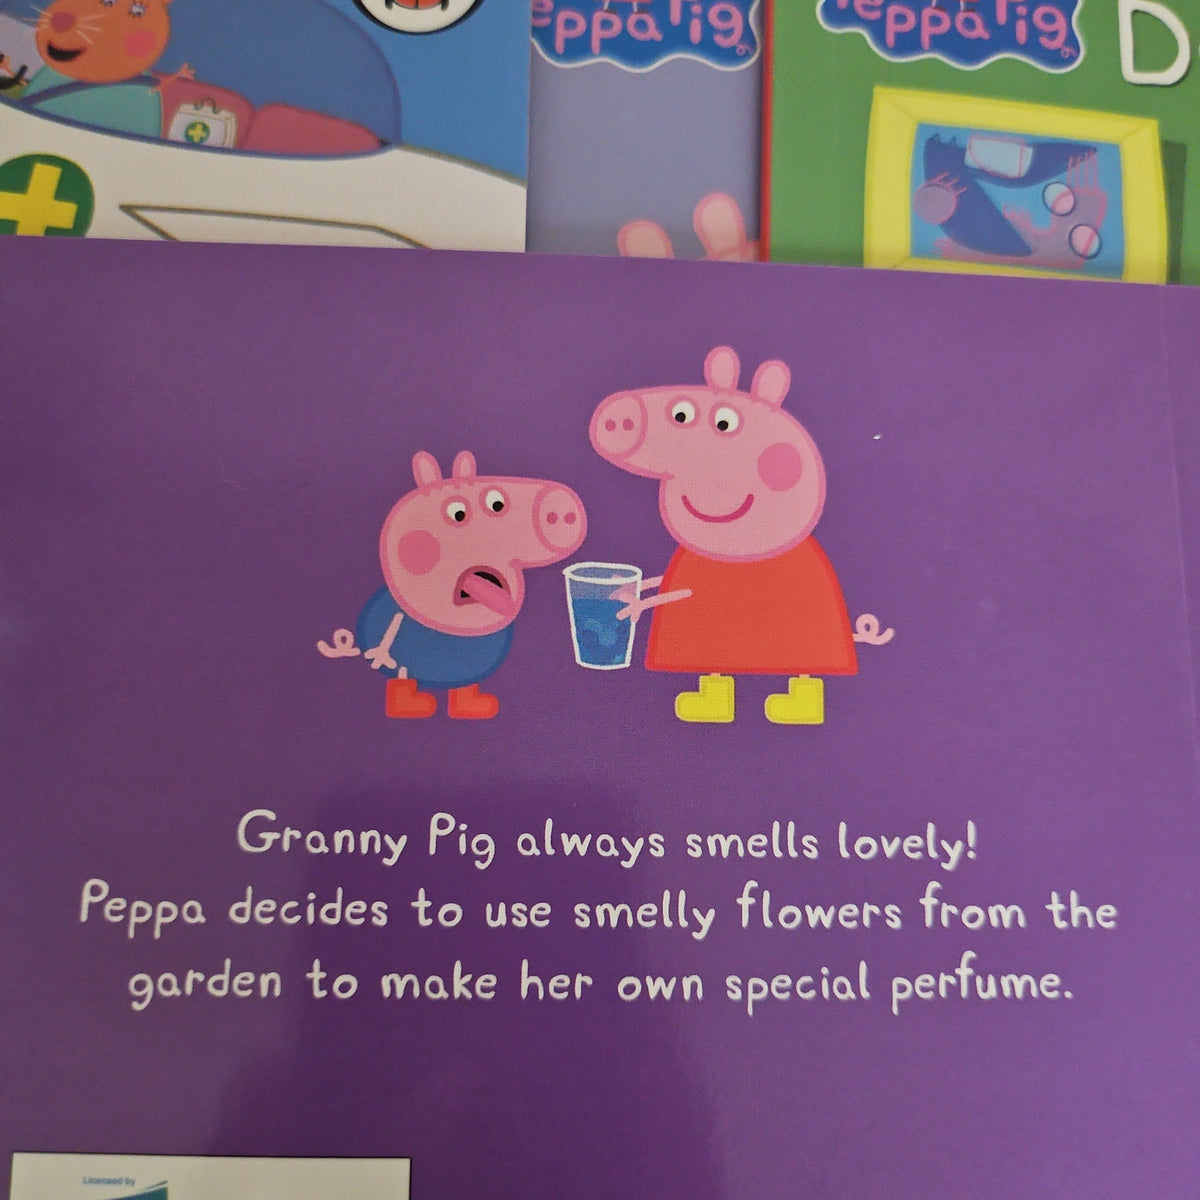 The Amazing Peppa Pig Collection:Granny Pig’s Perfume